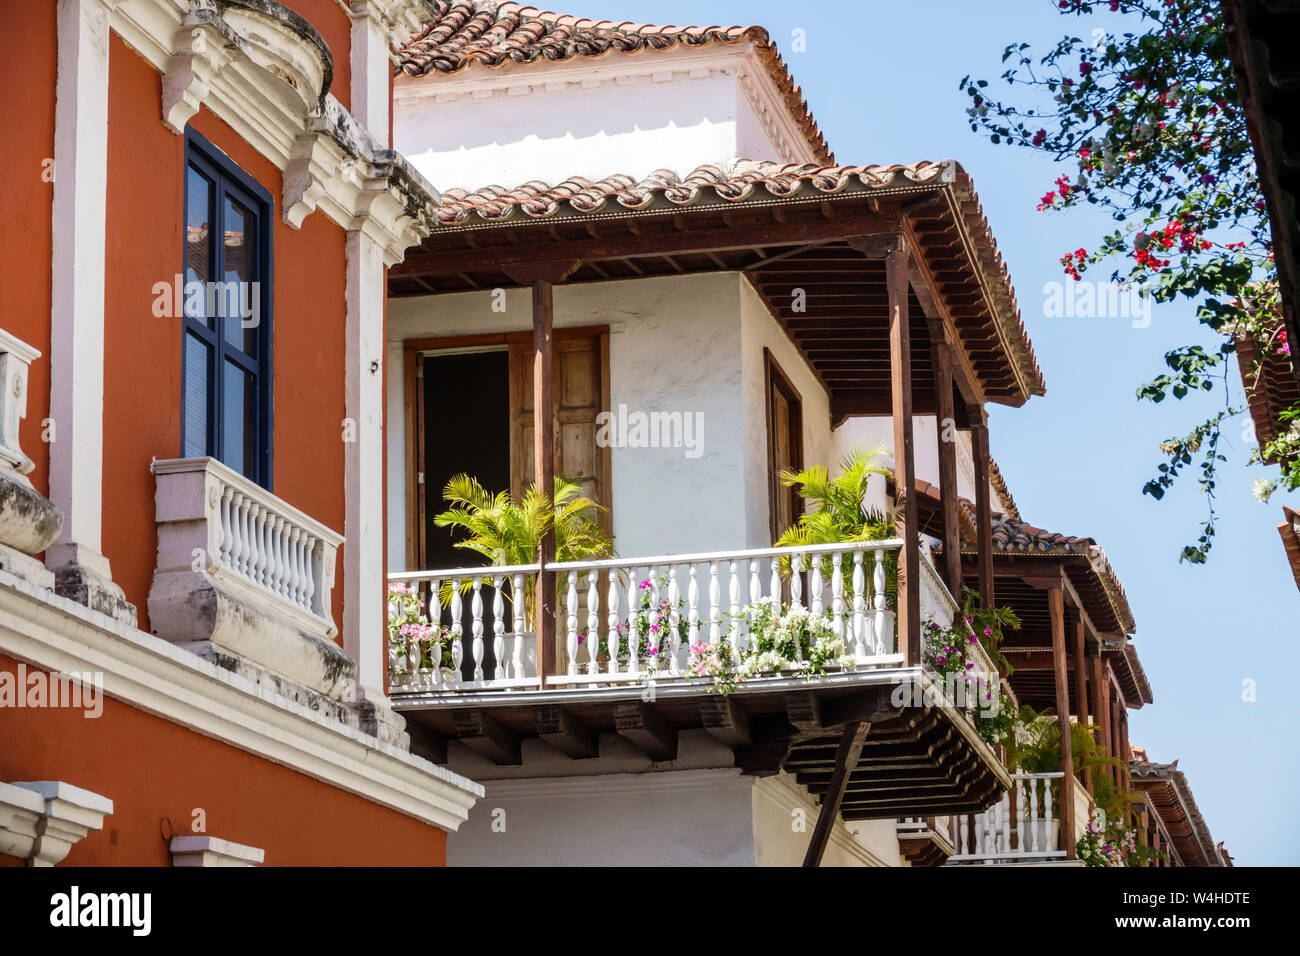 Colombia Cartagena Old Walled City Center centre colonial architecture facade wood balcony spindle railing ornamental planters residential apar Stock Photo